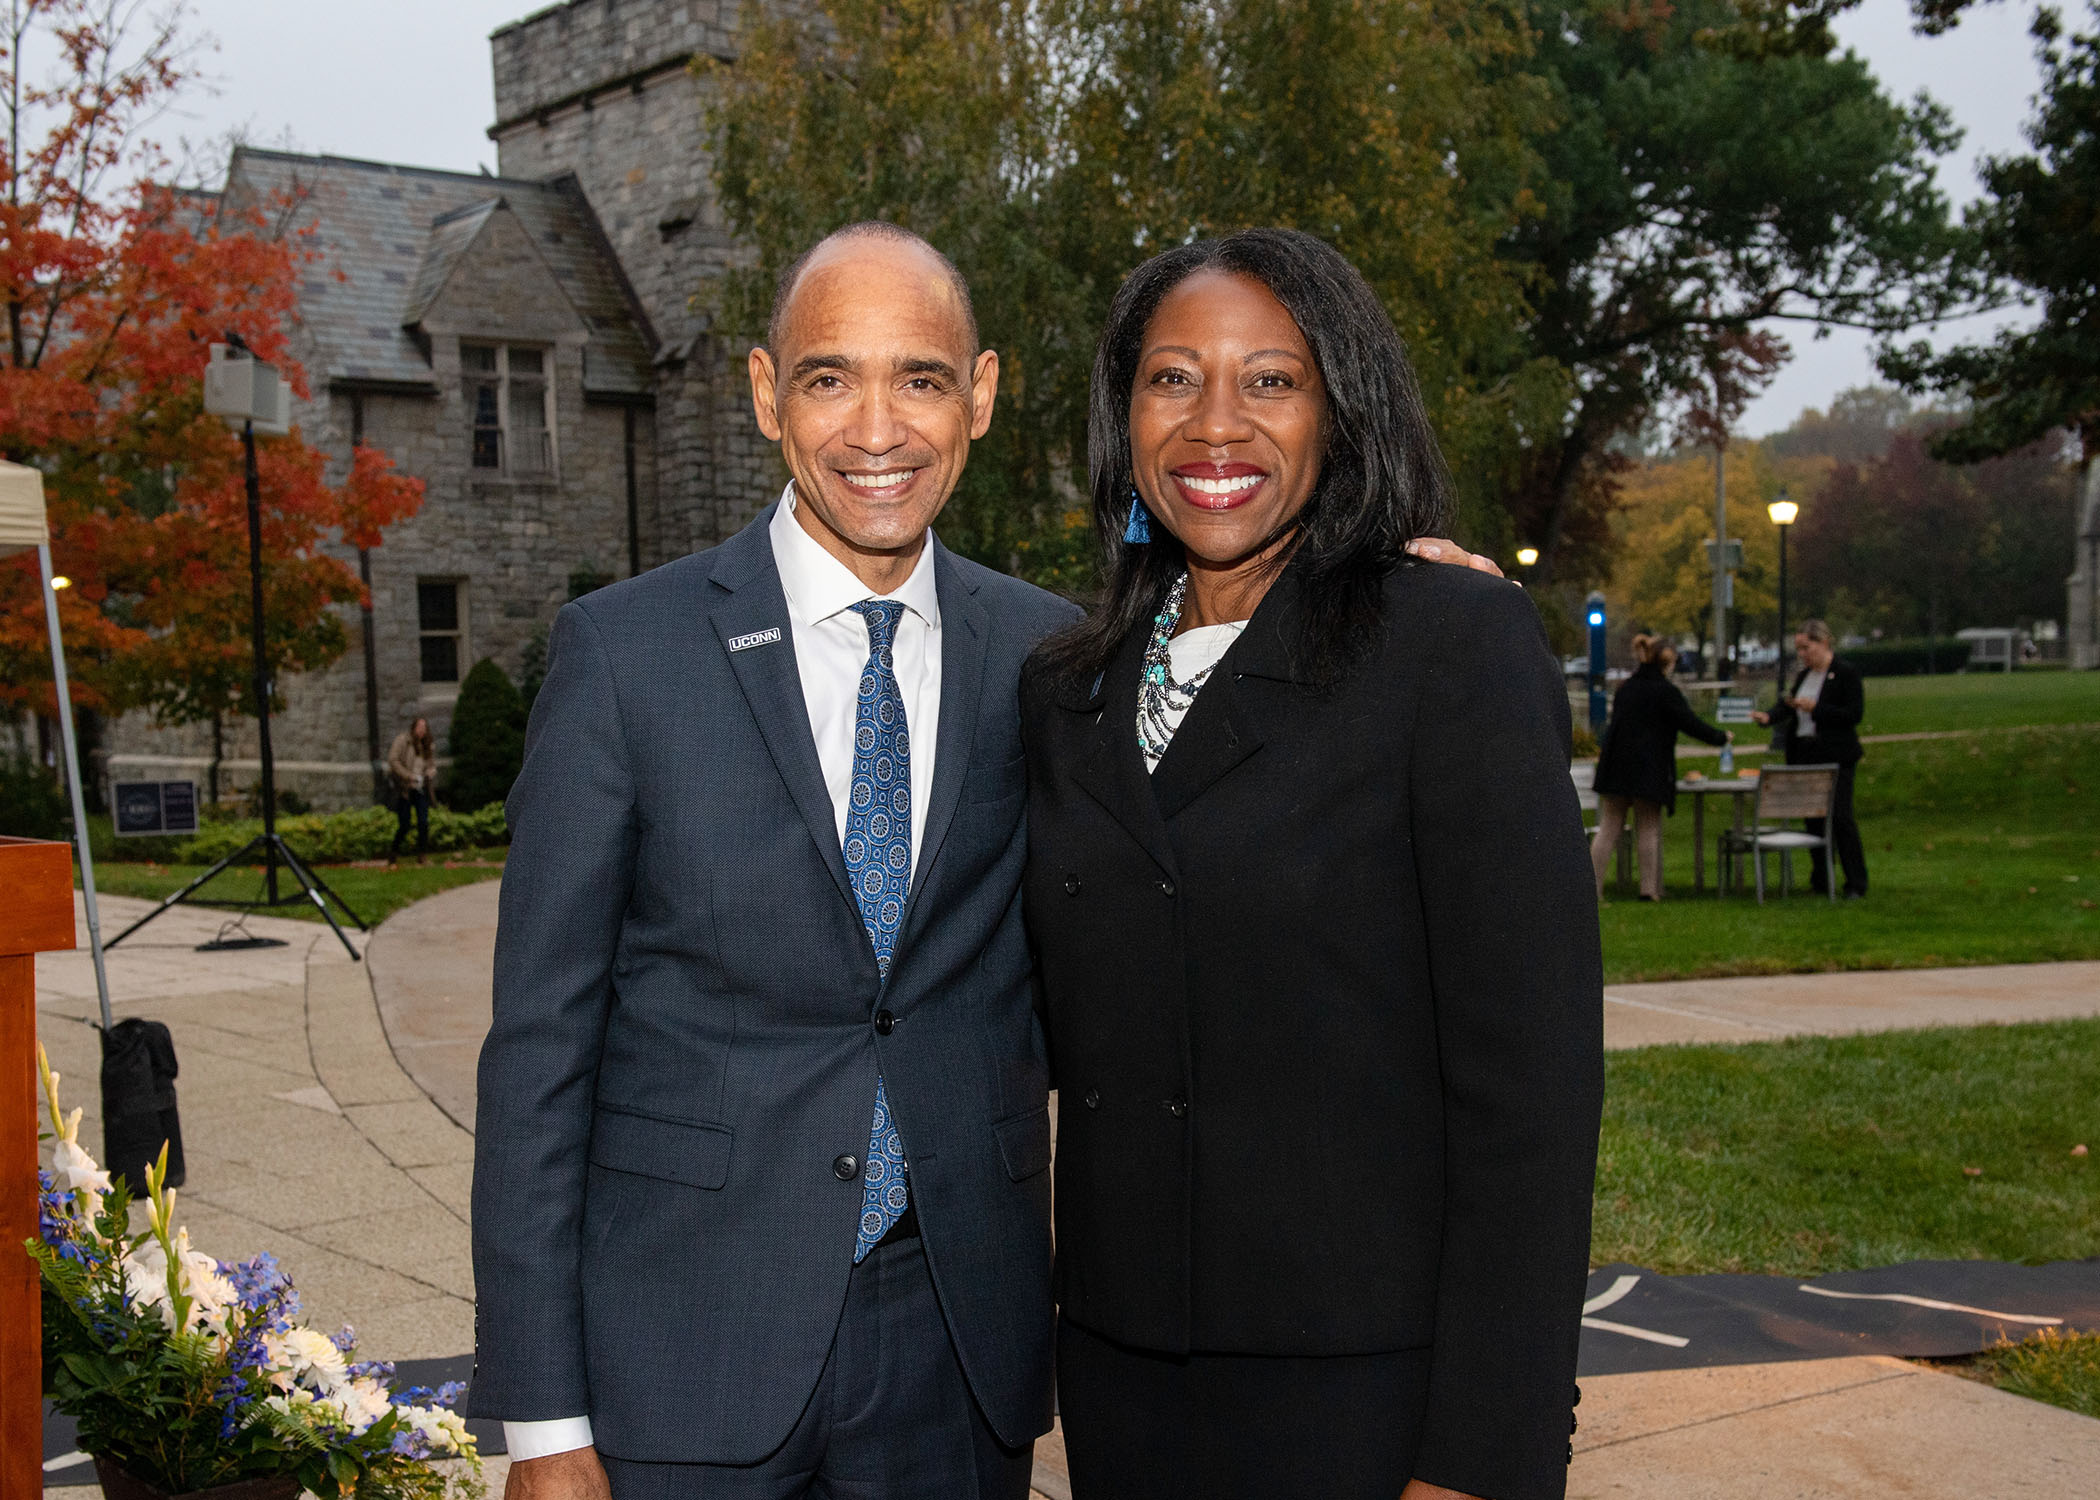 UConn President Andrew Agwunobi and UConn Law Dean Eboni S. Nelson at UConn Law Founders' Day